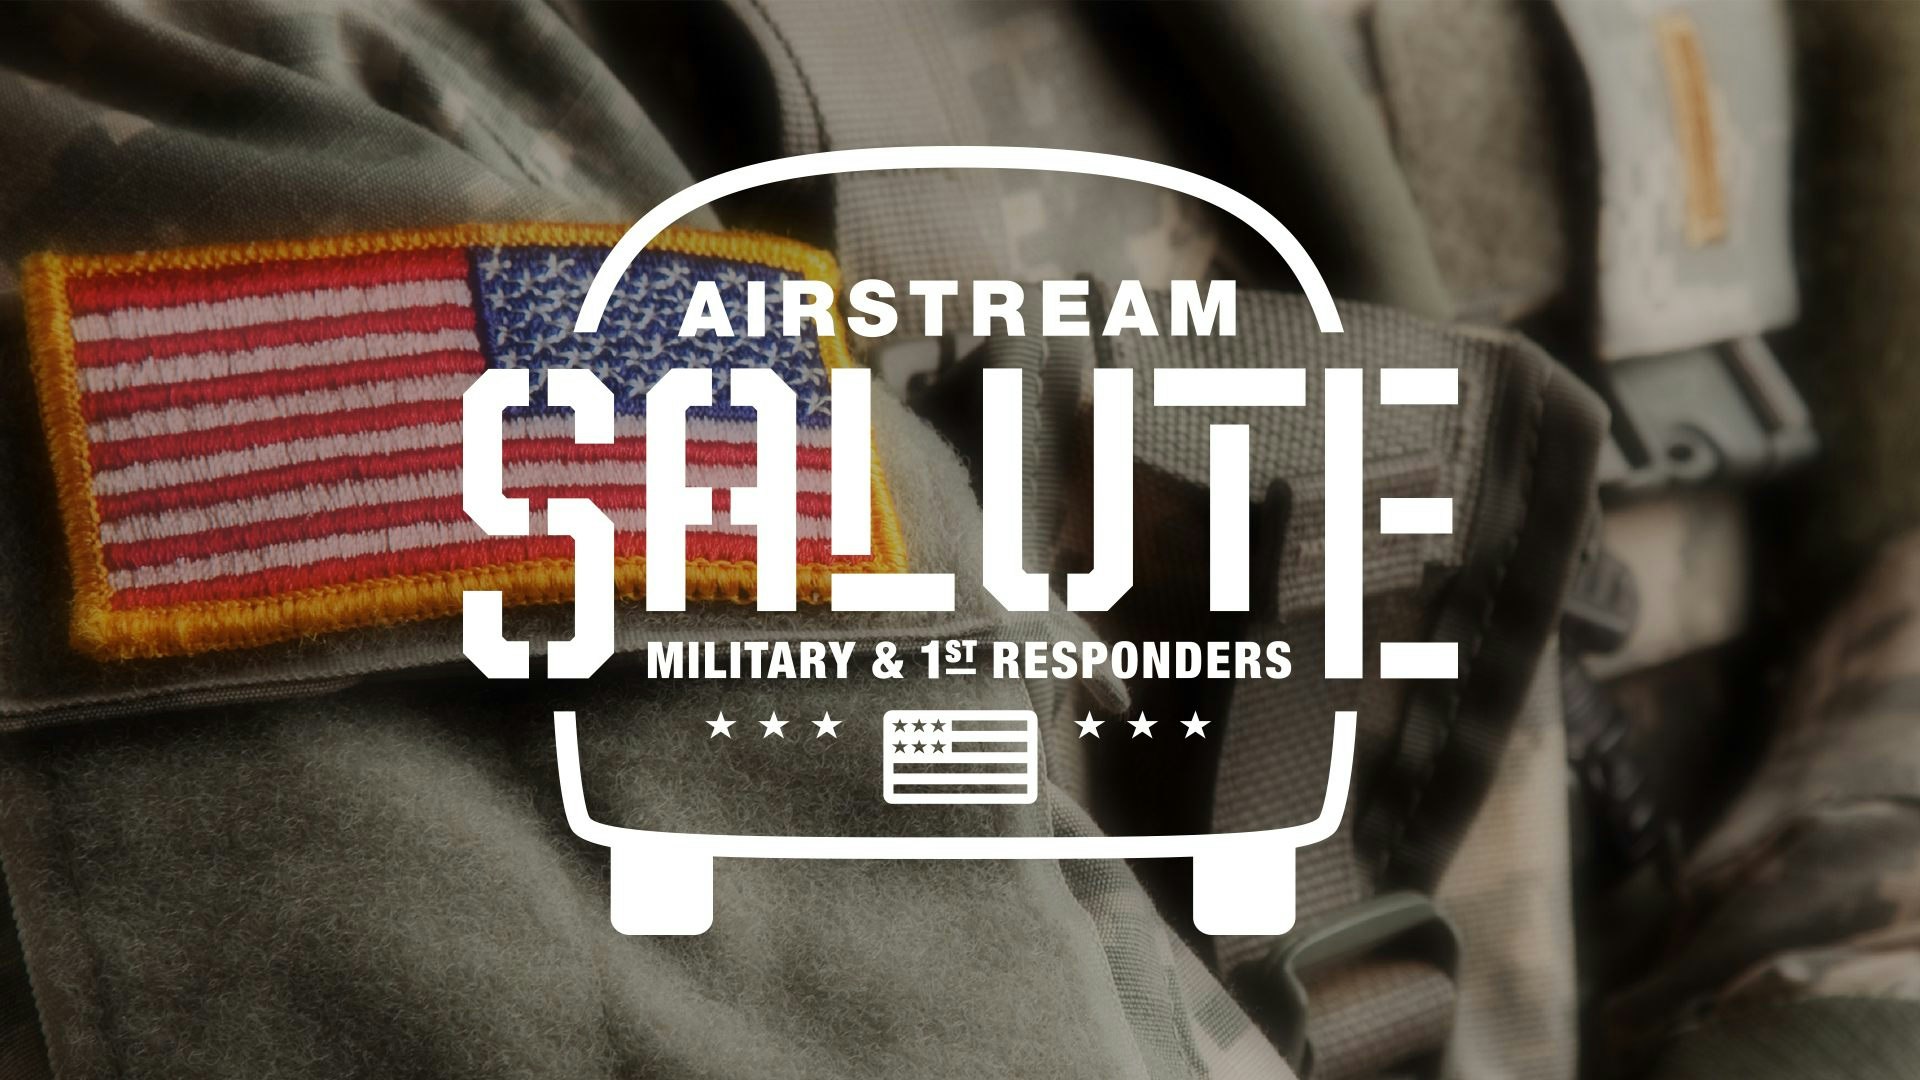 Airstream Salute Military and First Responder Program